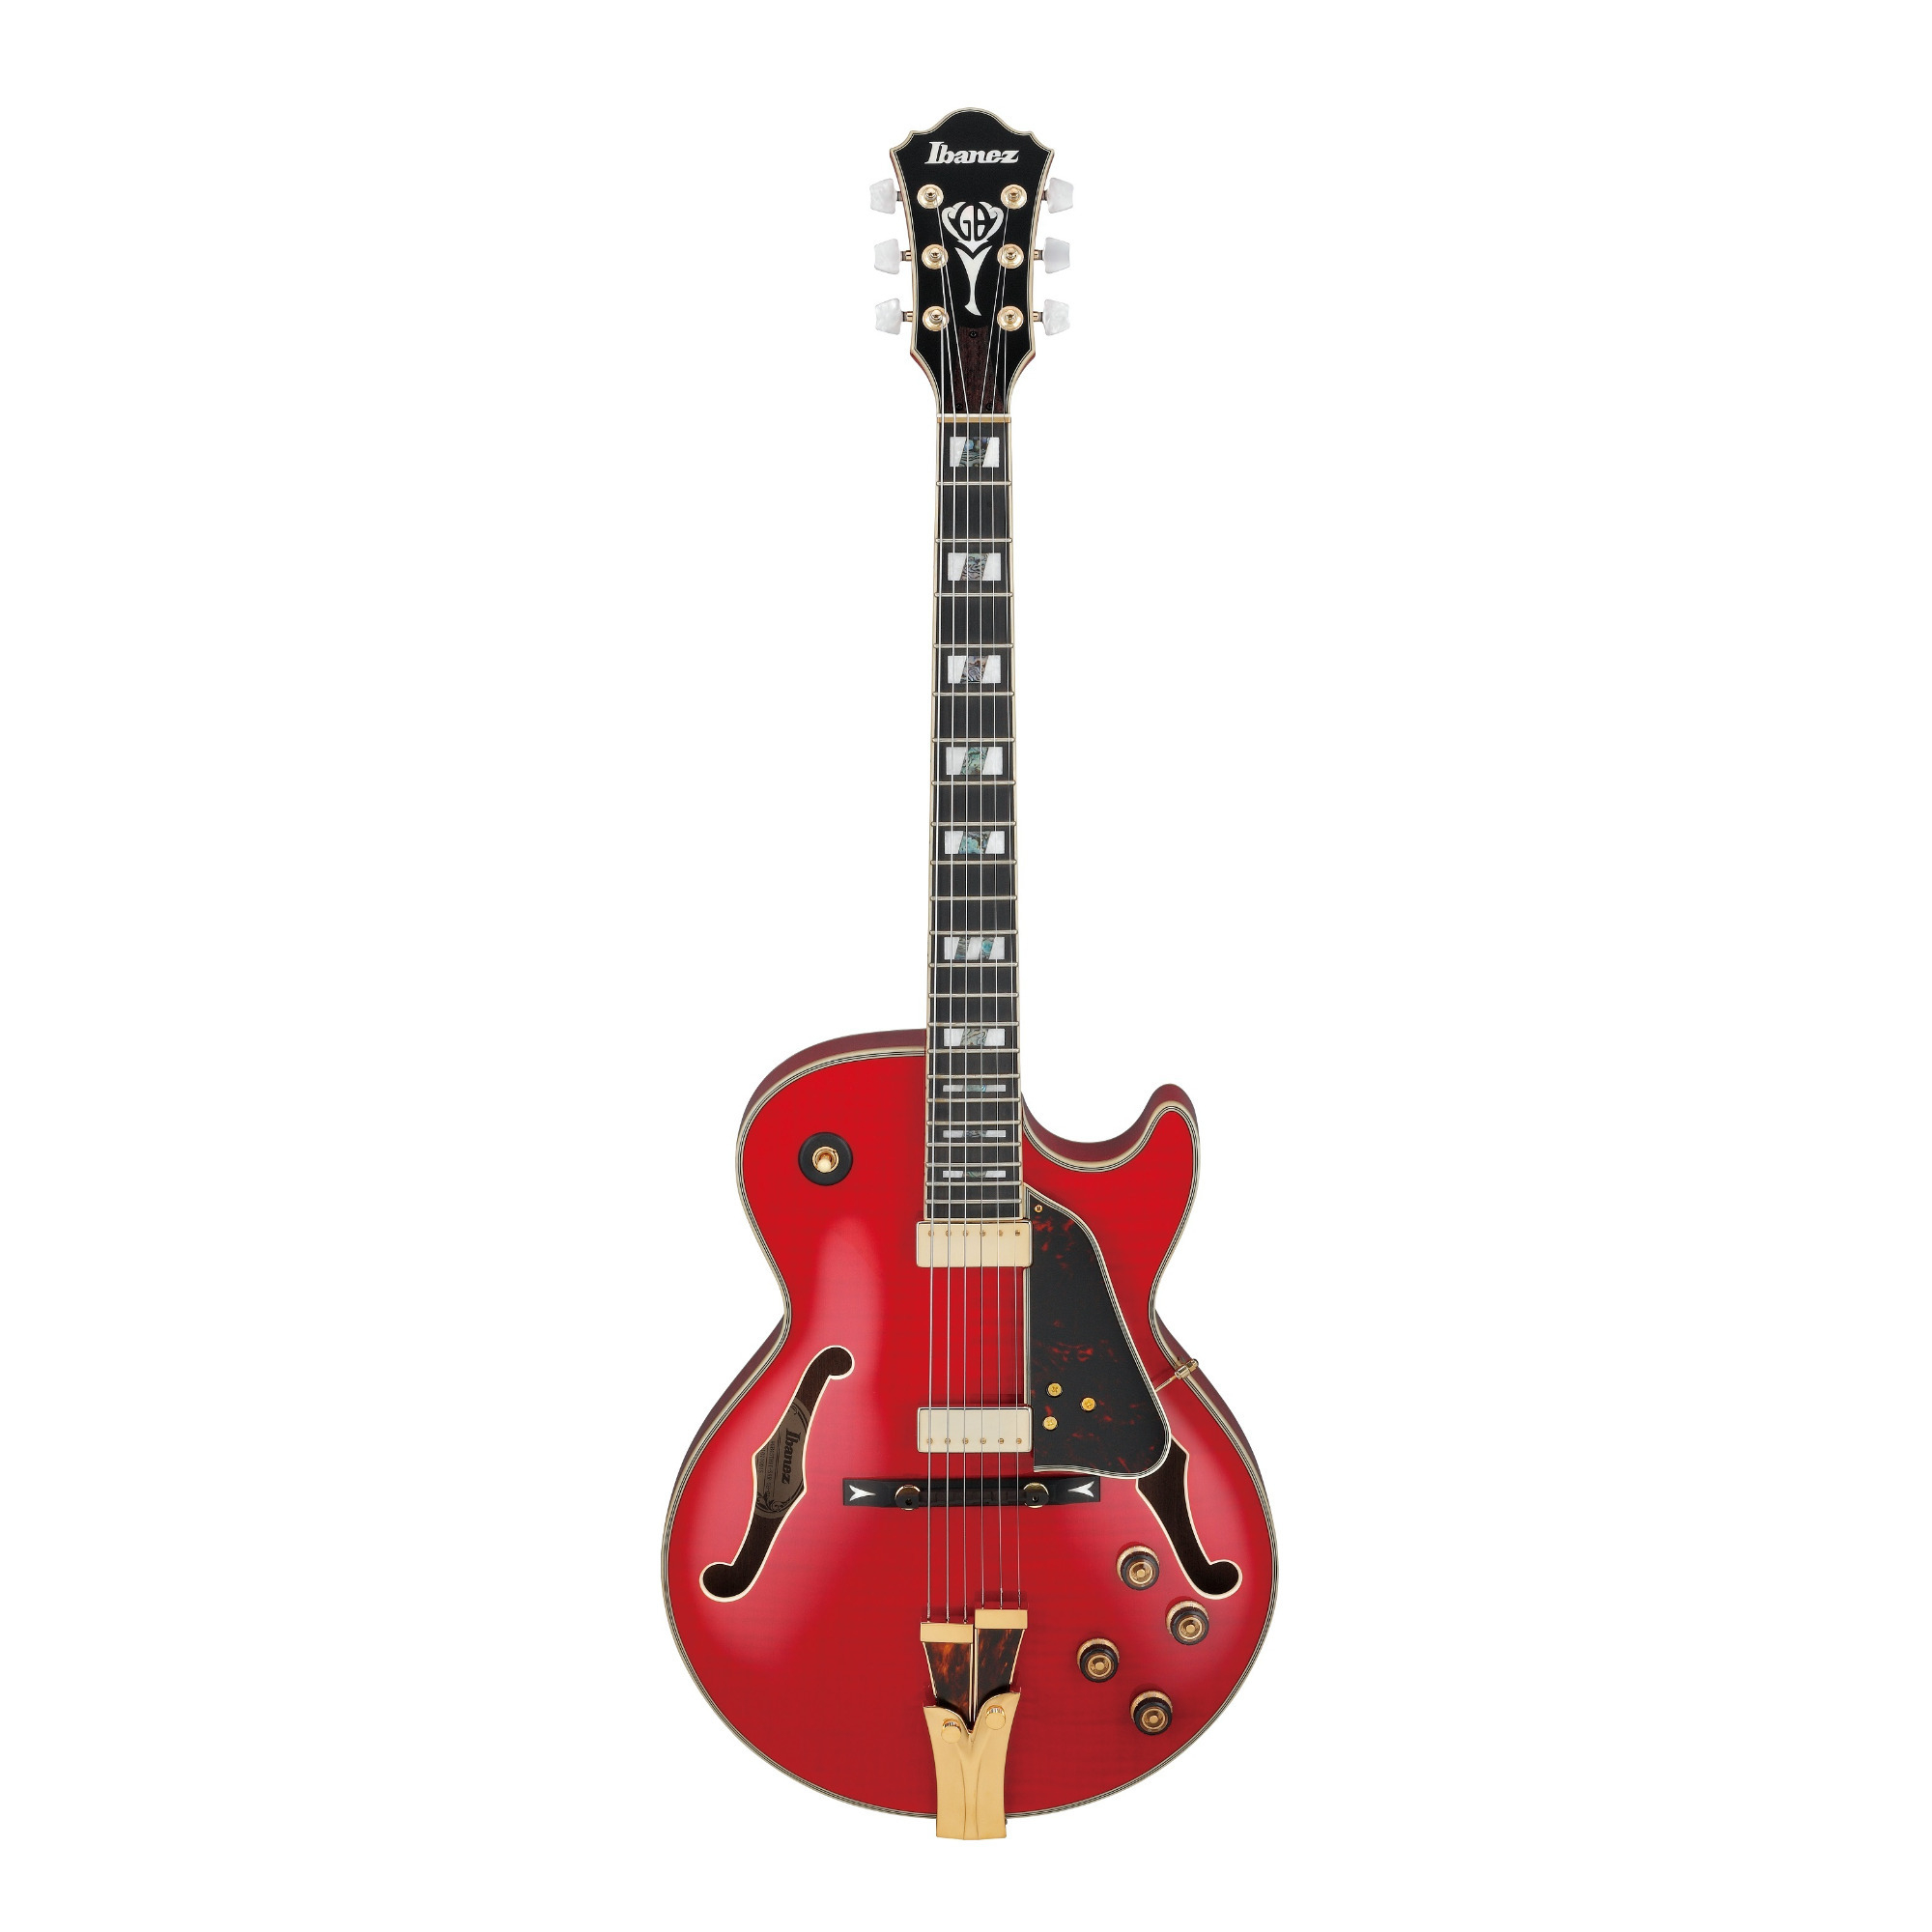 Signature Series George Benson 6-String Hollow Body Electric Guitar in Red - Ibanez GB10SEFMSRR